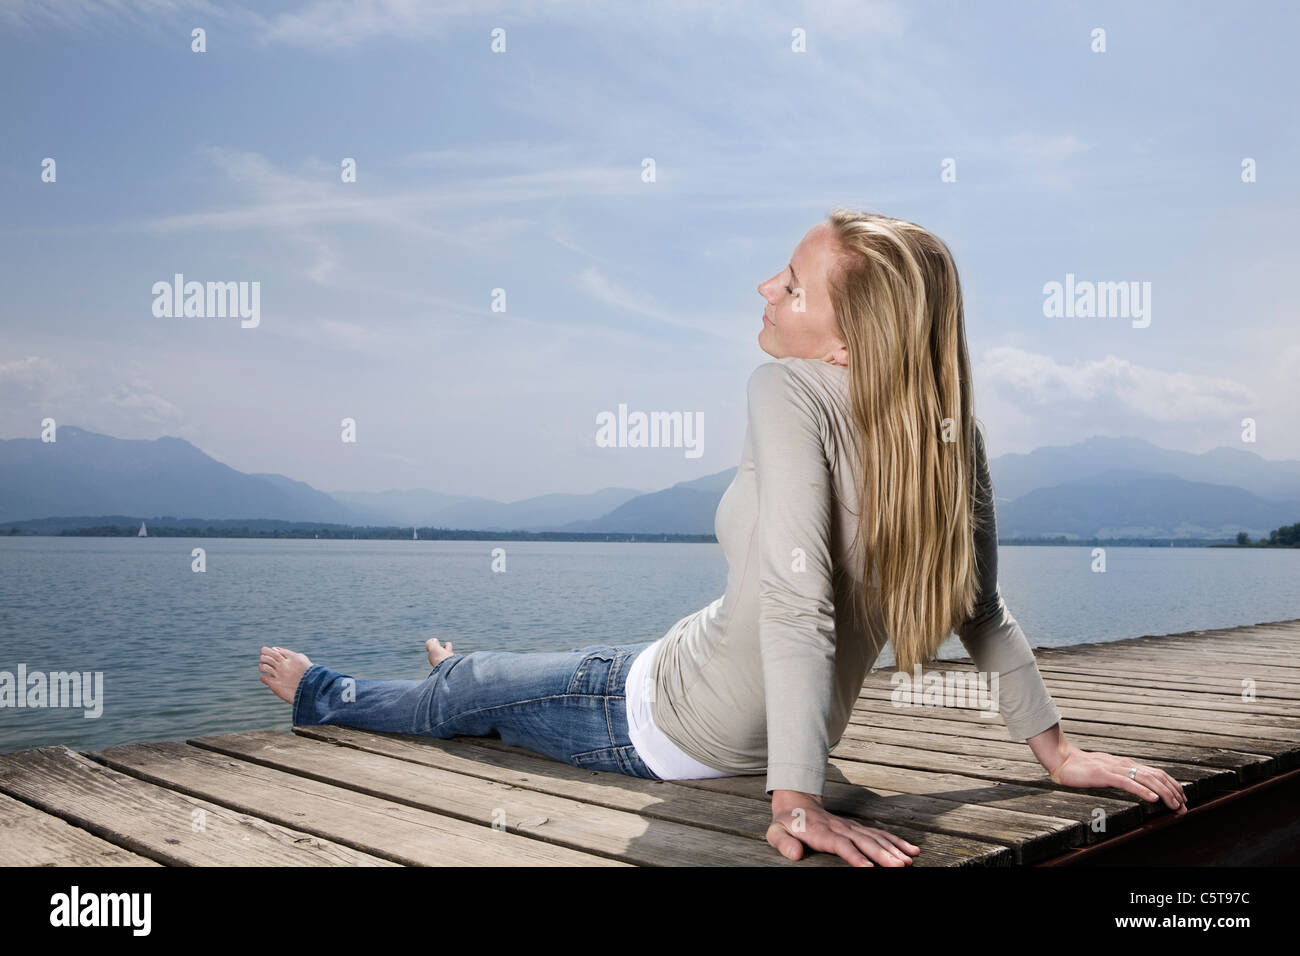 Germany, Chiemsee, Woman sitting on jetty, eyes closed Stock Photo